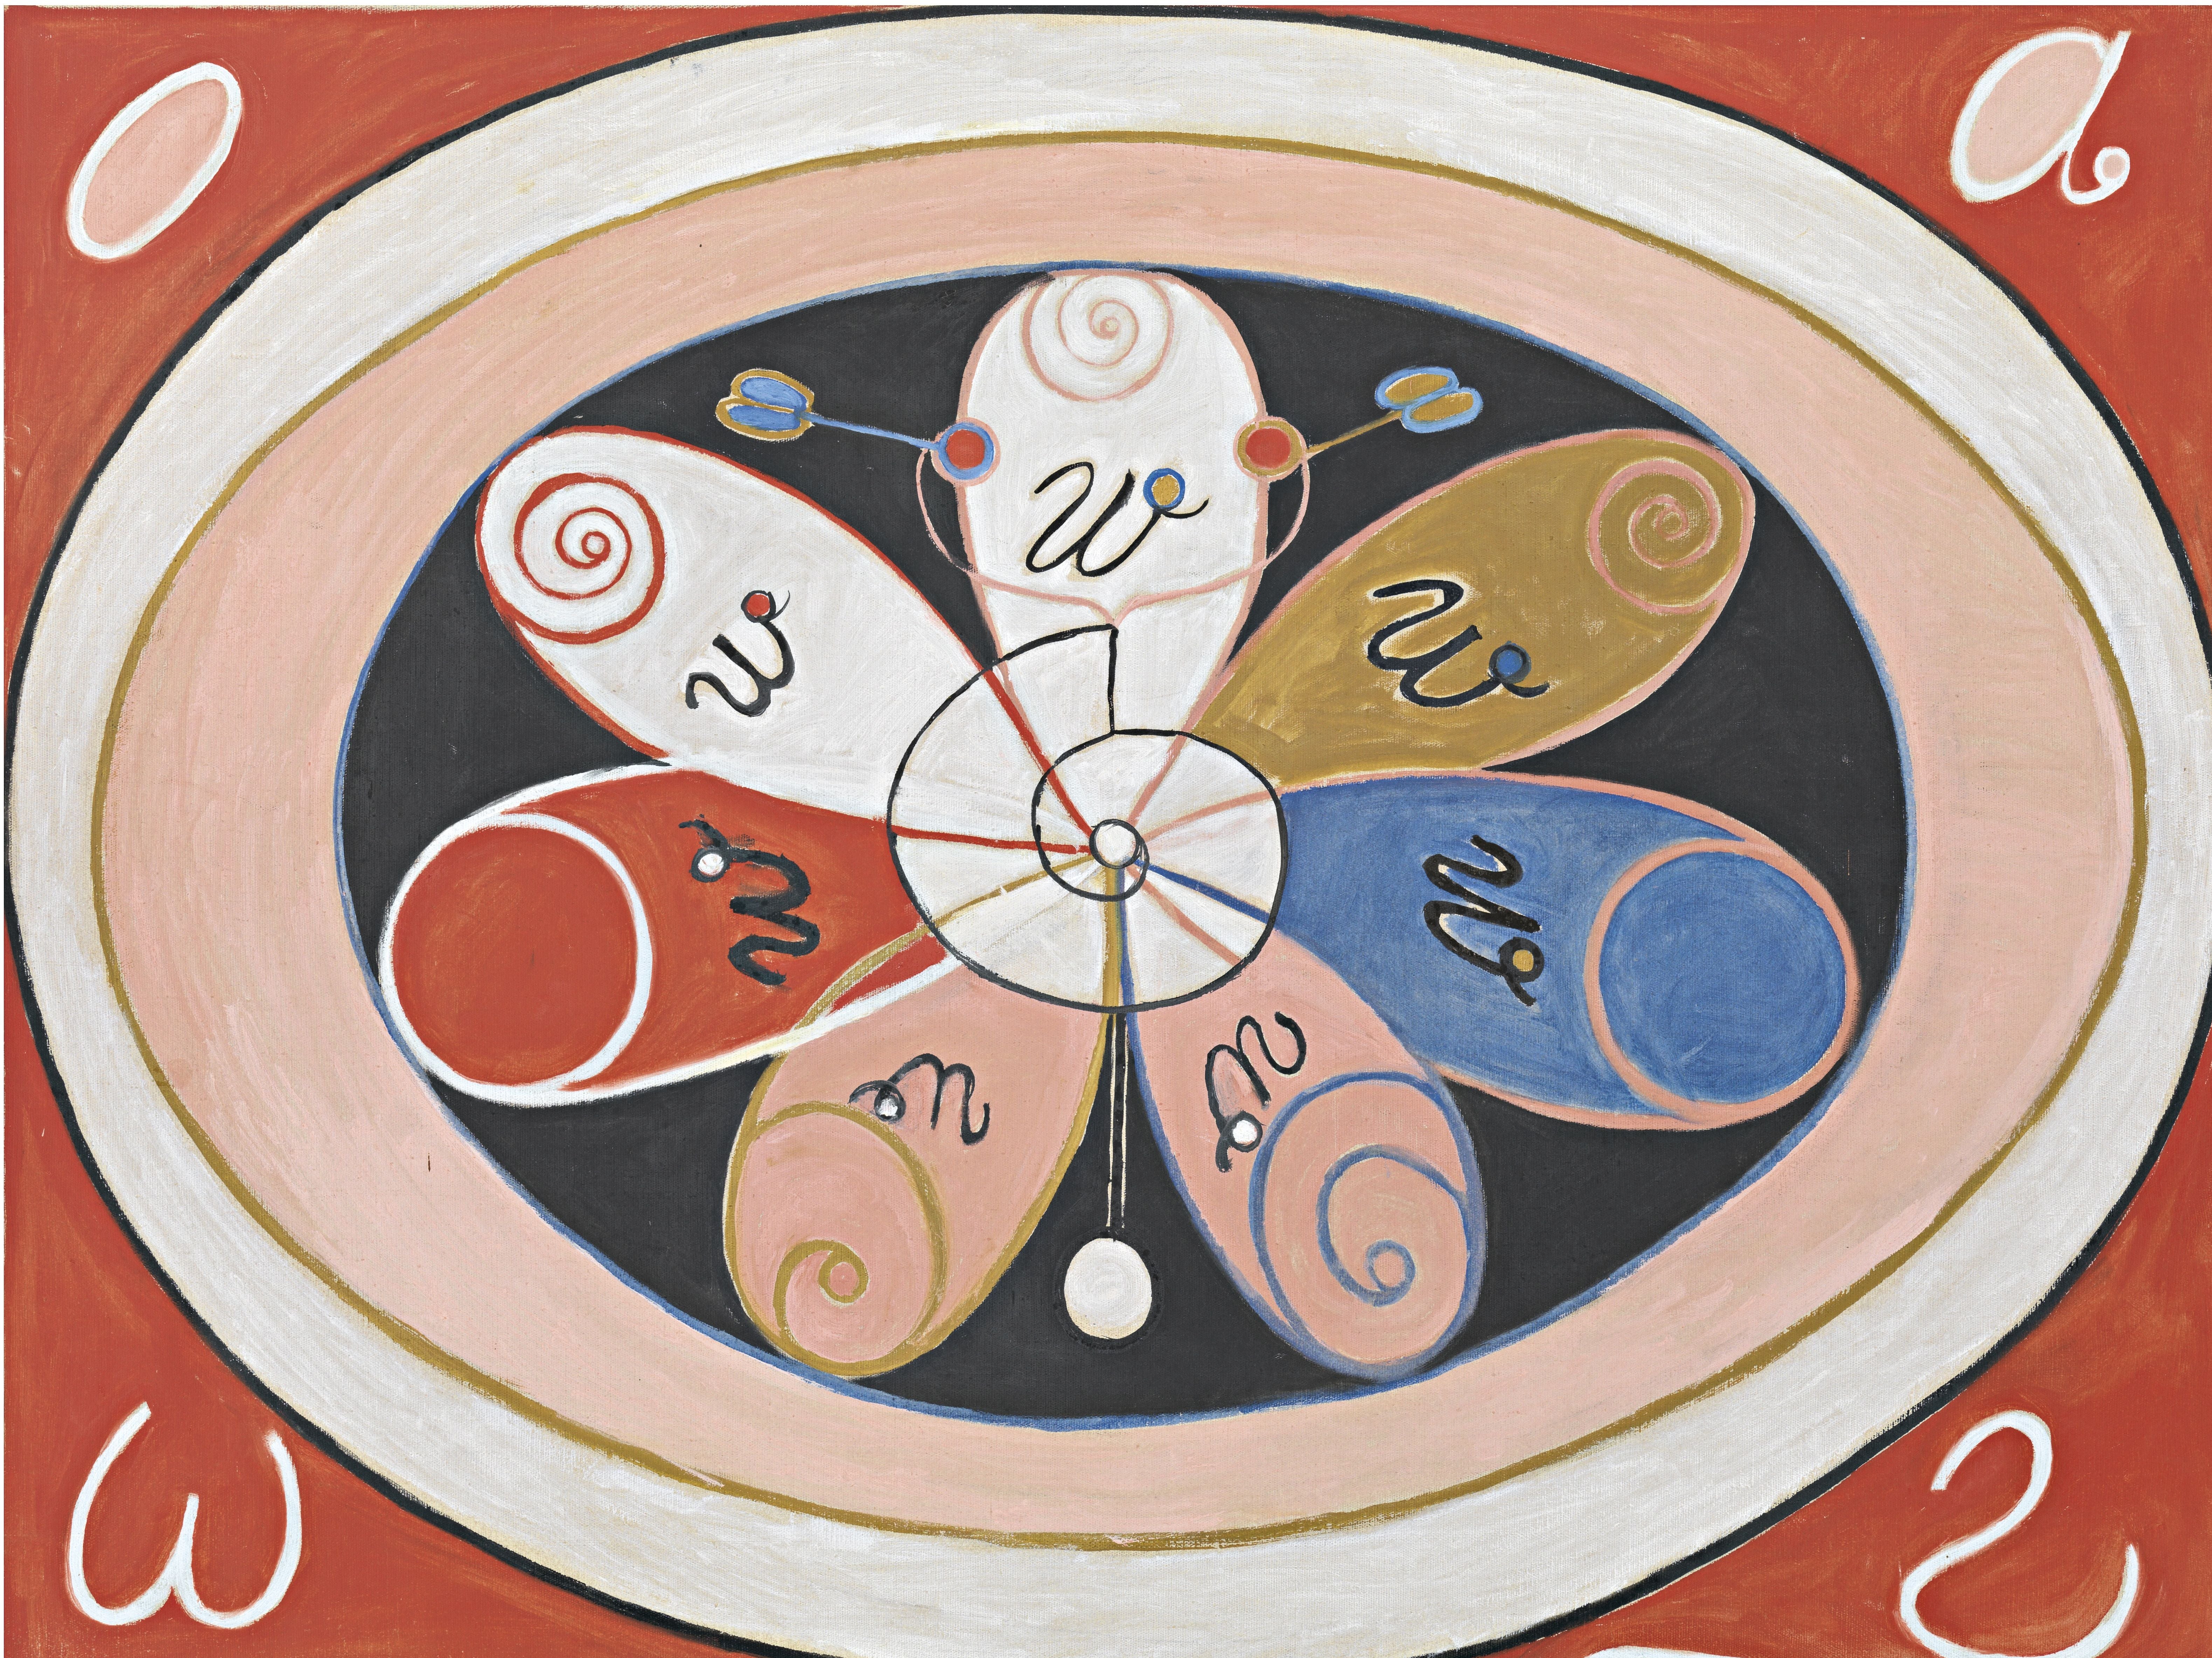 Hilma af Klint’s The Evolution, The WUS Seven-Pointed Star Series, Group VI, No 15 from 1908